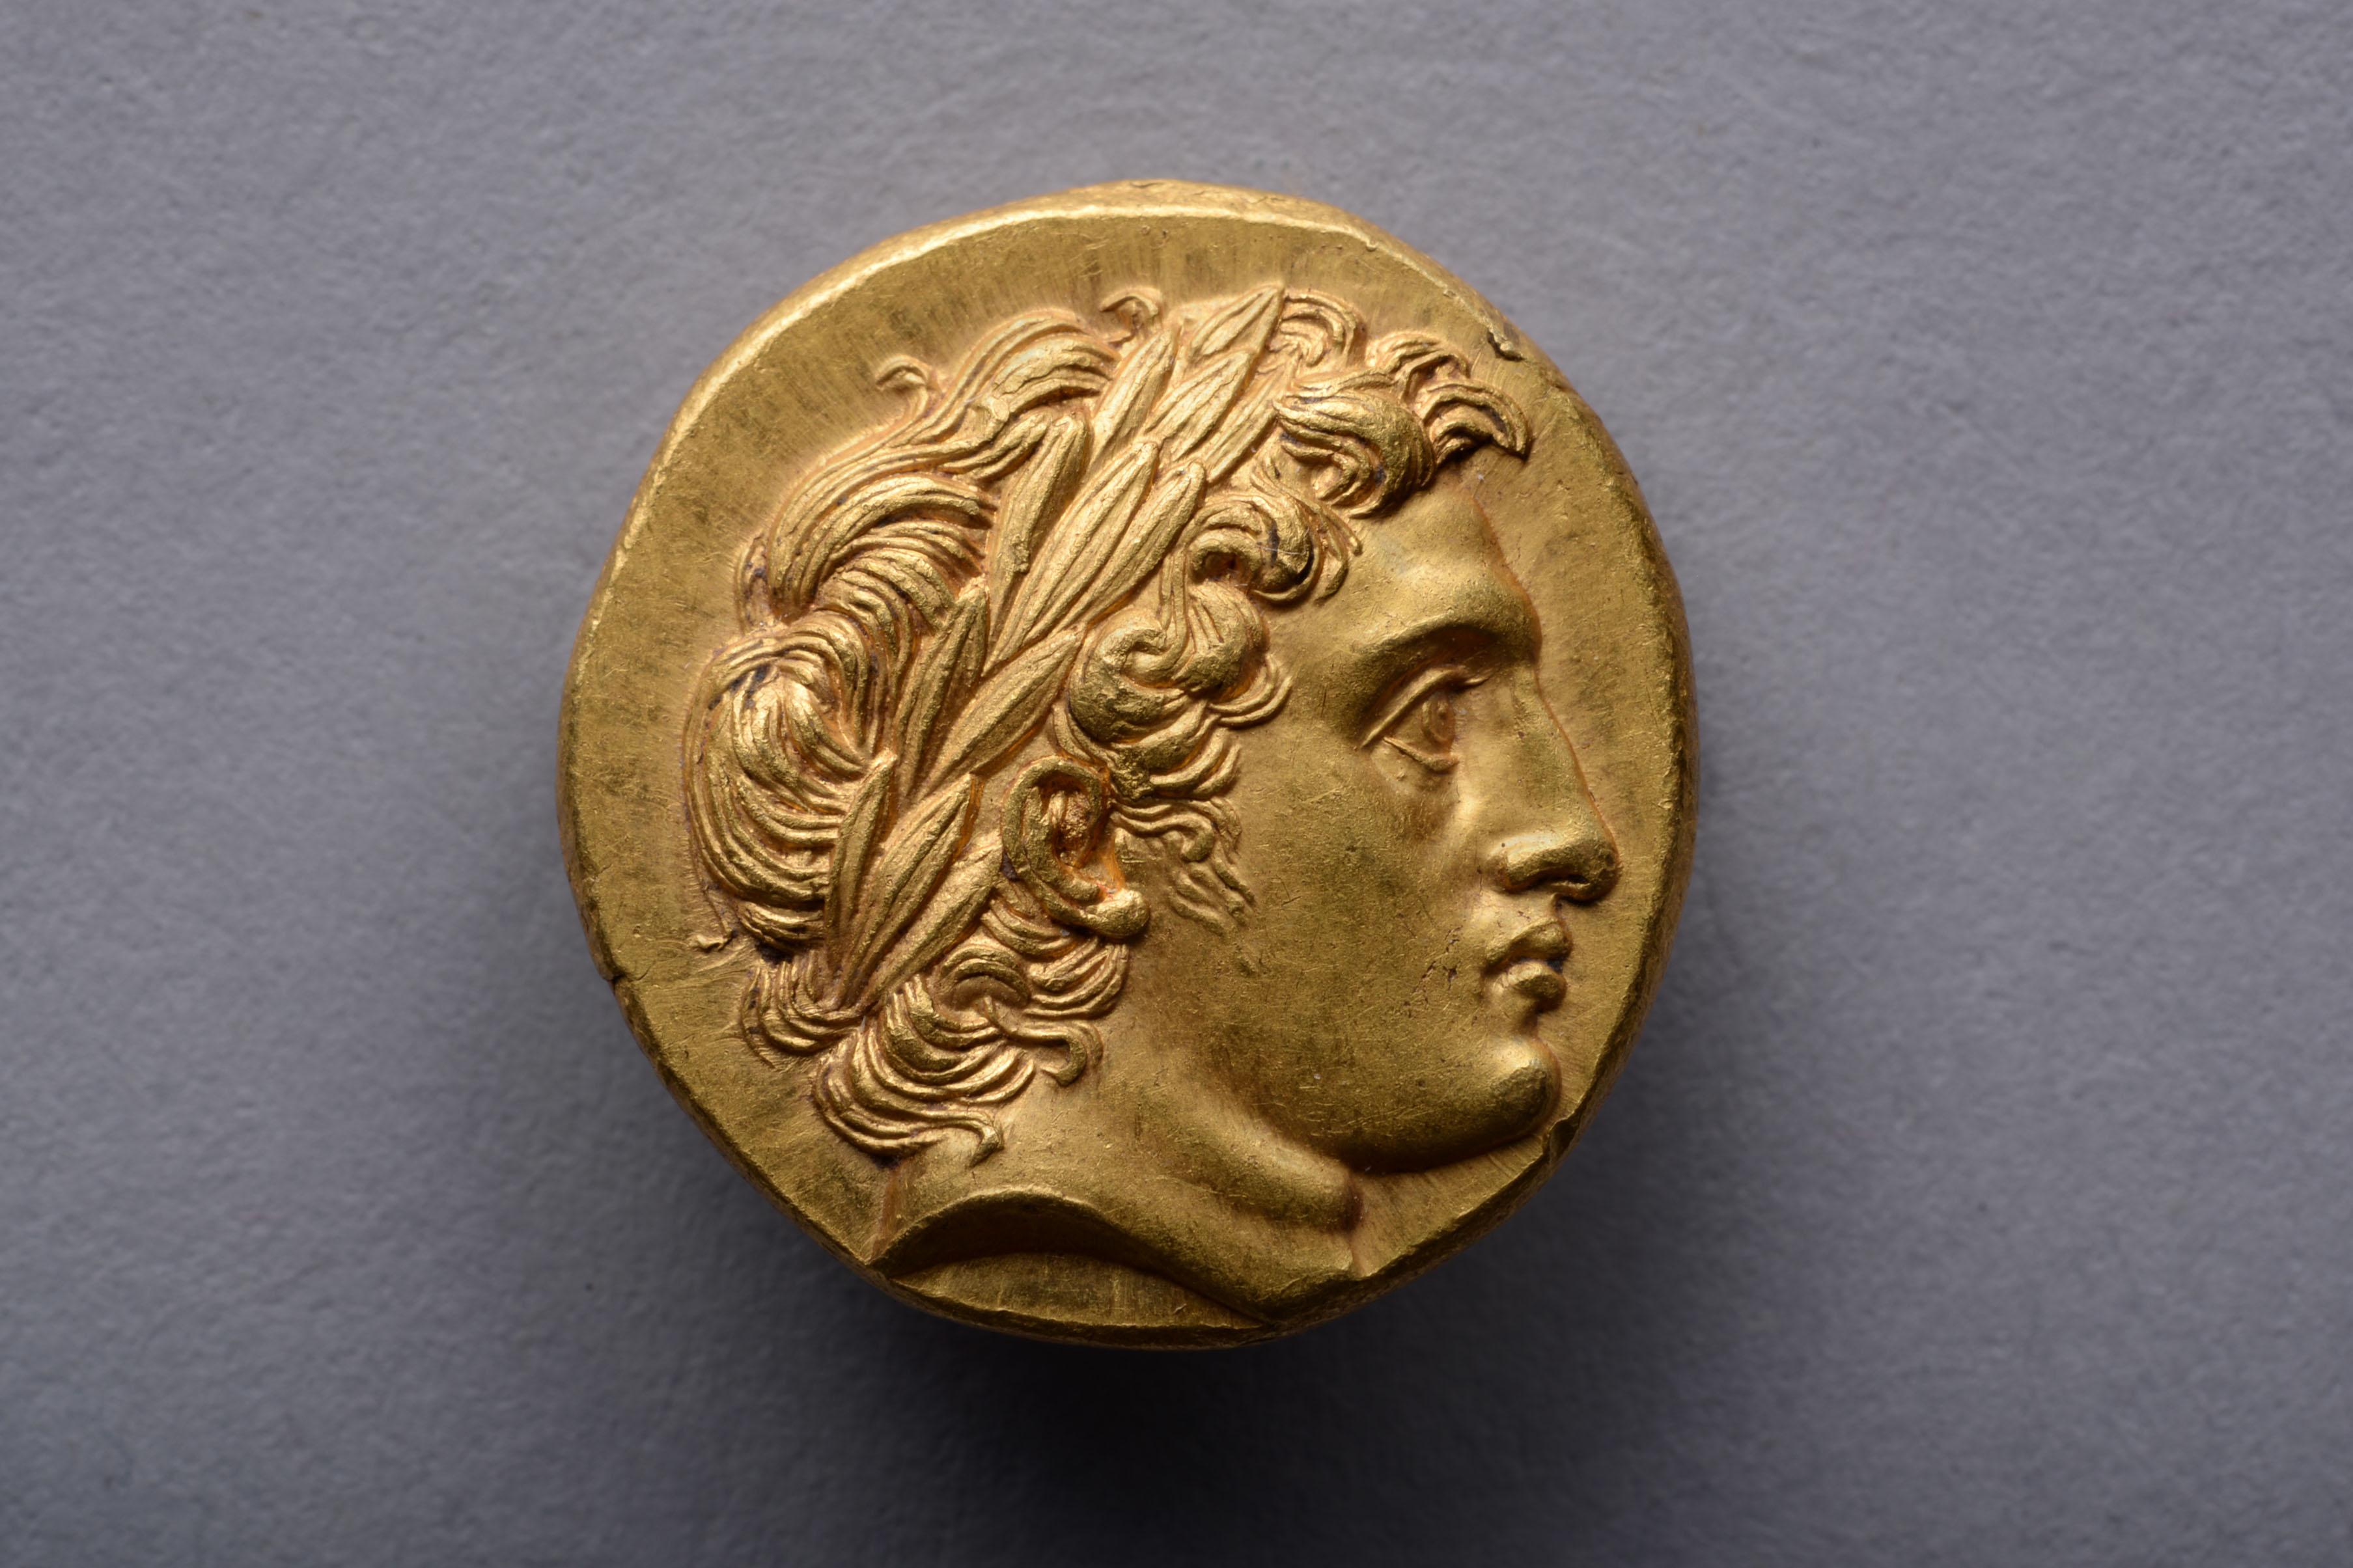 A magnificent, gem-like coin with a sublime portrait of Alexander the Great. This gold stater was issued under Alexander's brother Philip III, and was struck at the Colophon mint, circa 322-319 BC.

The obverse with one of the most beautiful